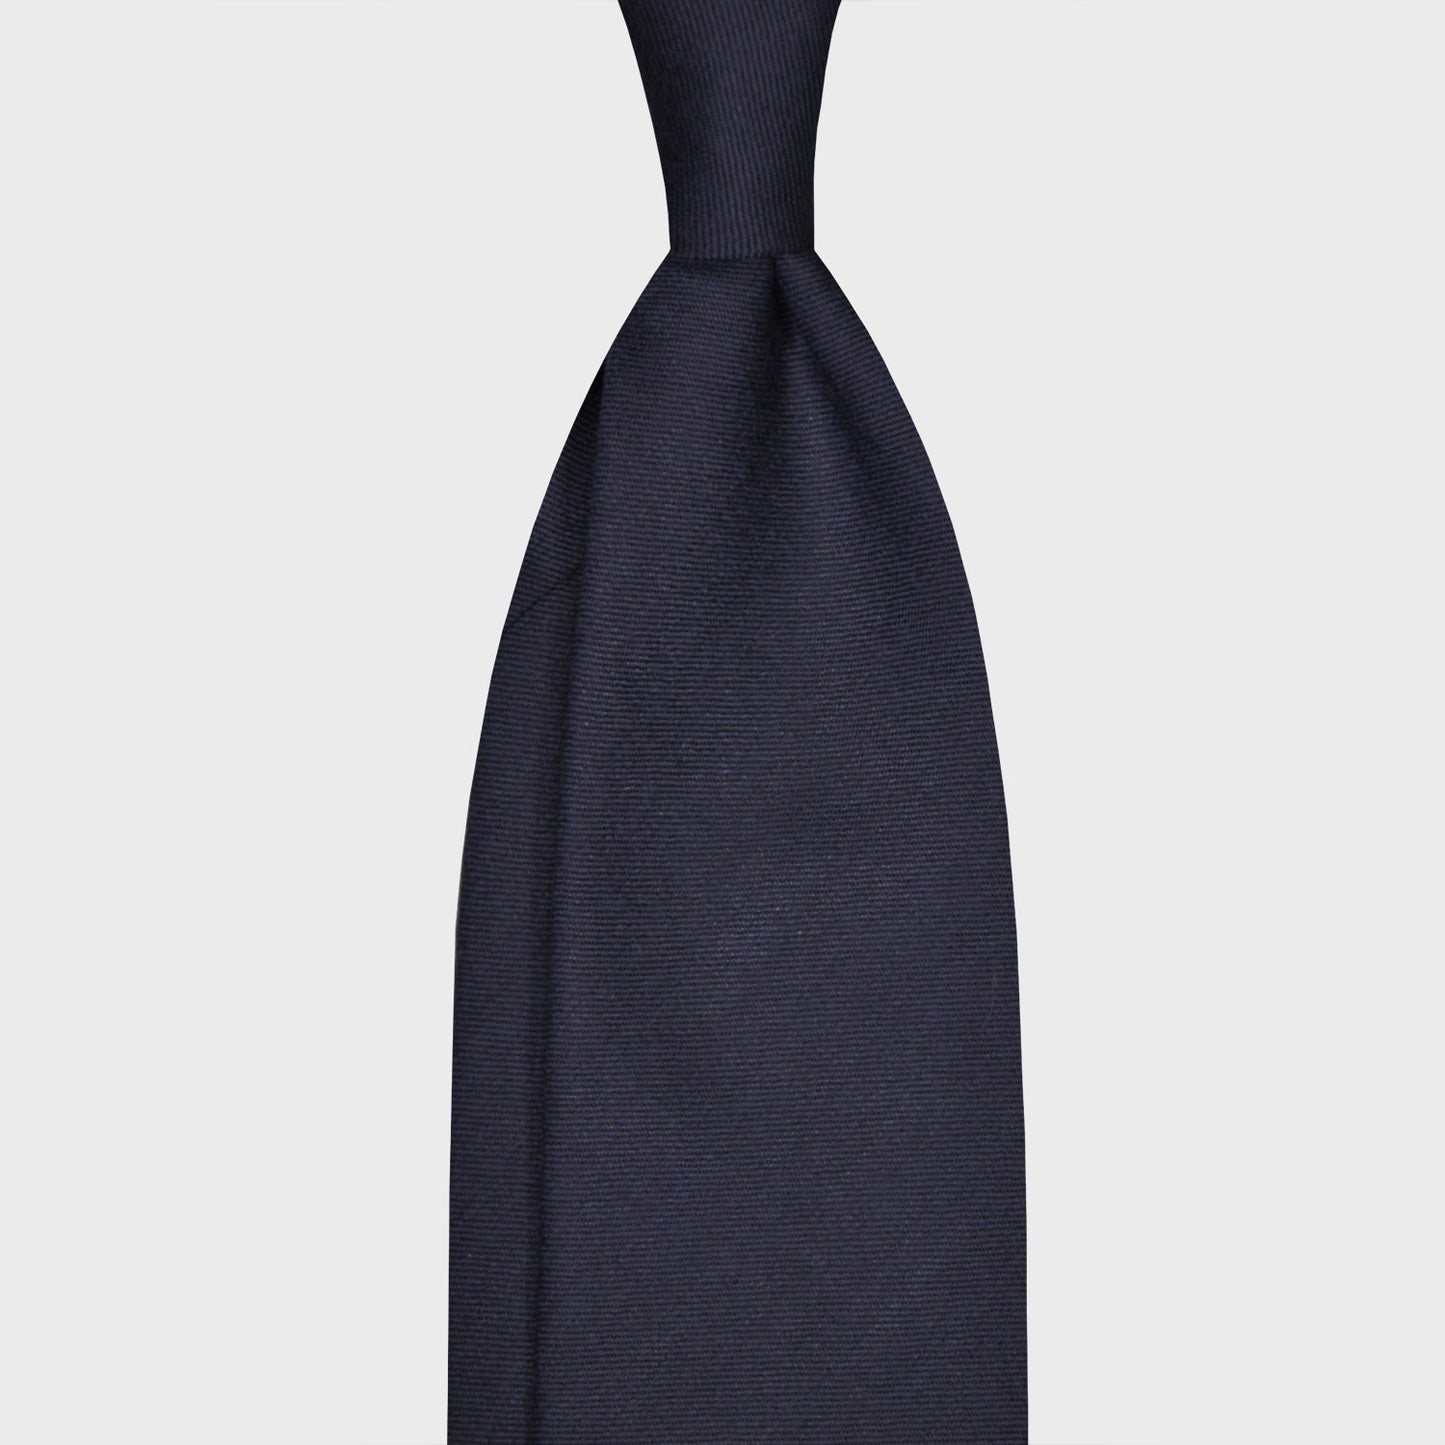 Load image into Gallery viewer, F.Marino Wool Tie 3 Folds Blue-Wools Boutique Uomo
